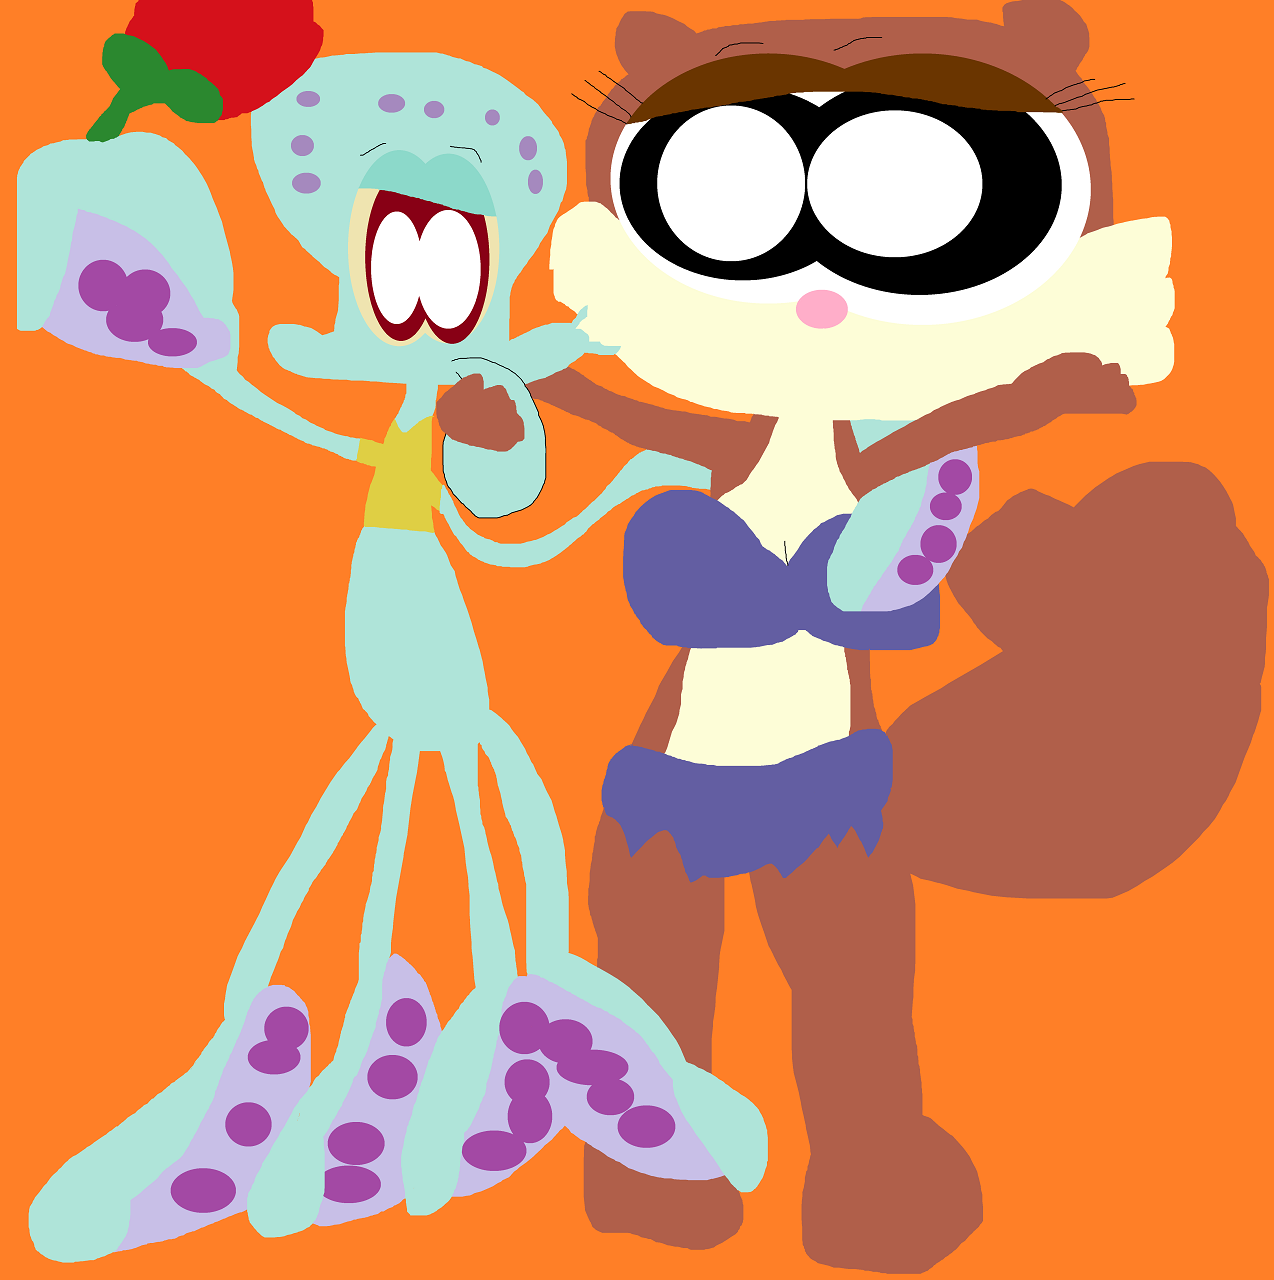 Squidward Kissing Sandy With A Rose In One Tentacle by Falconlobo